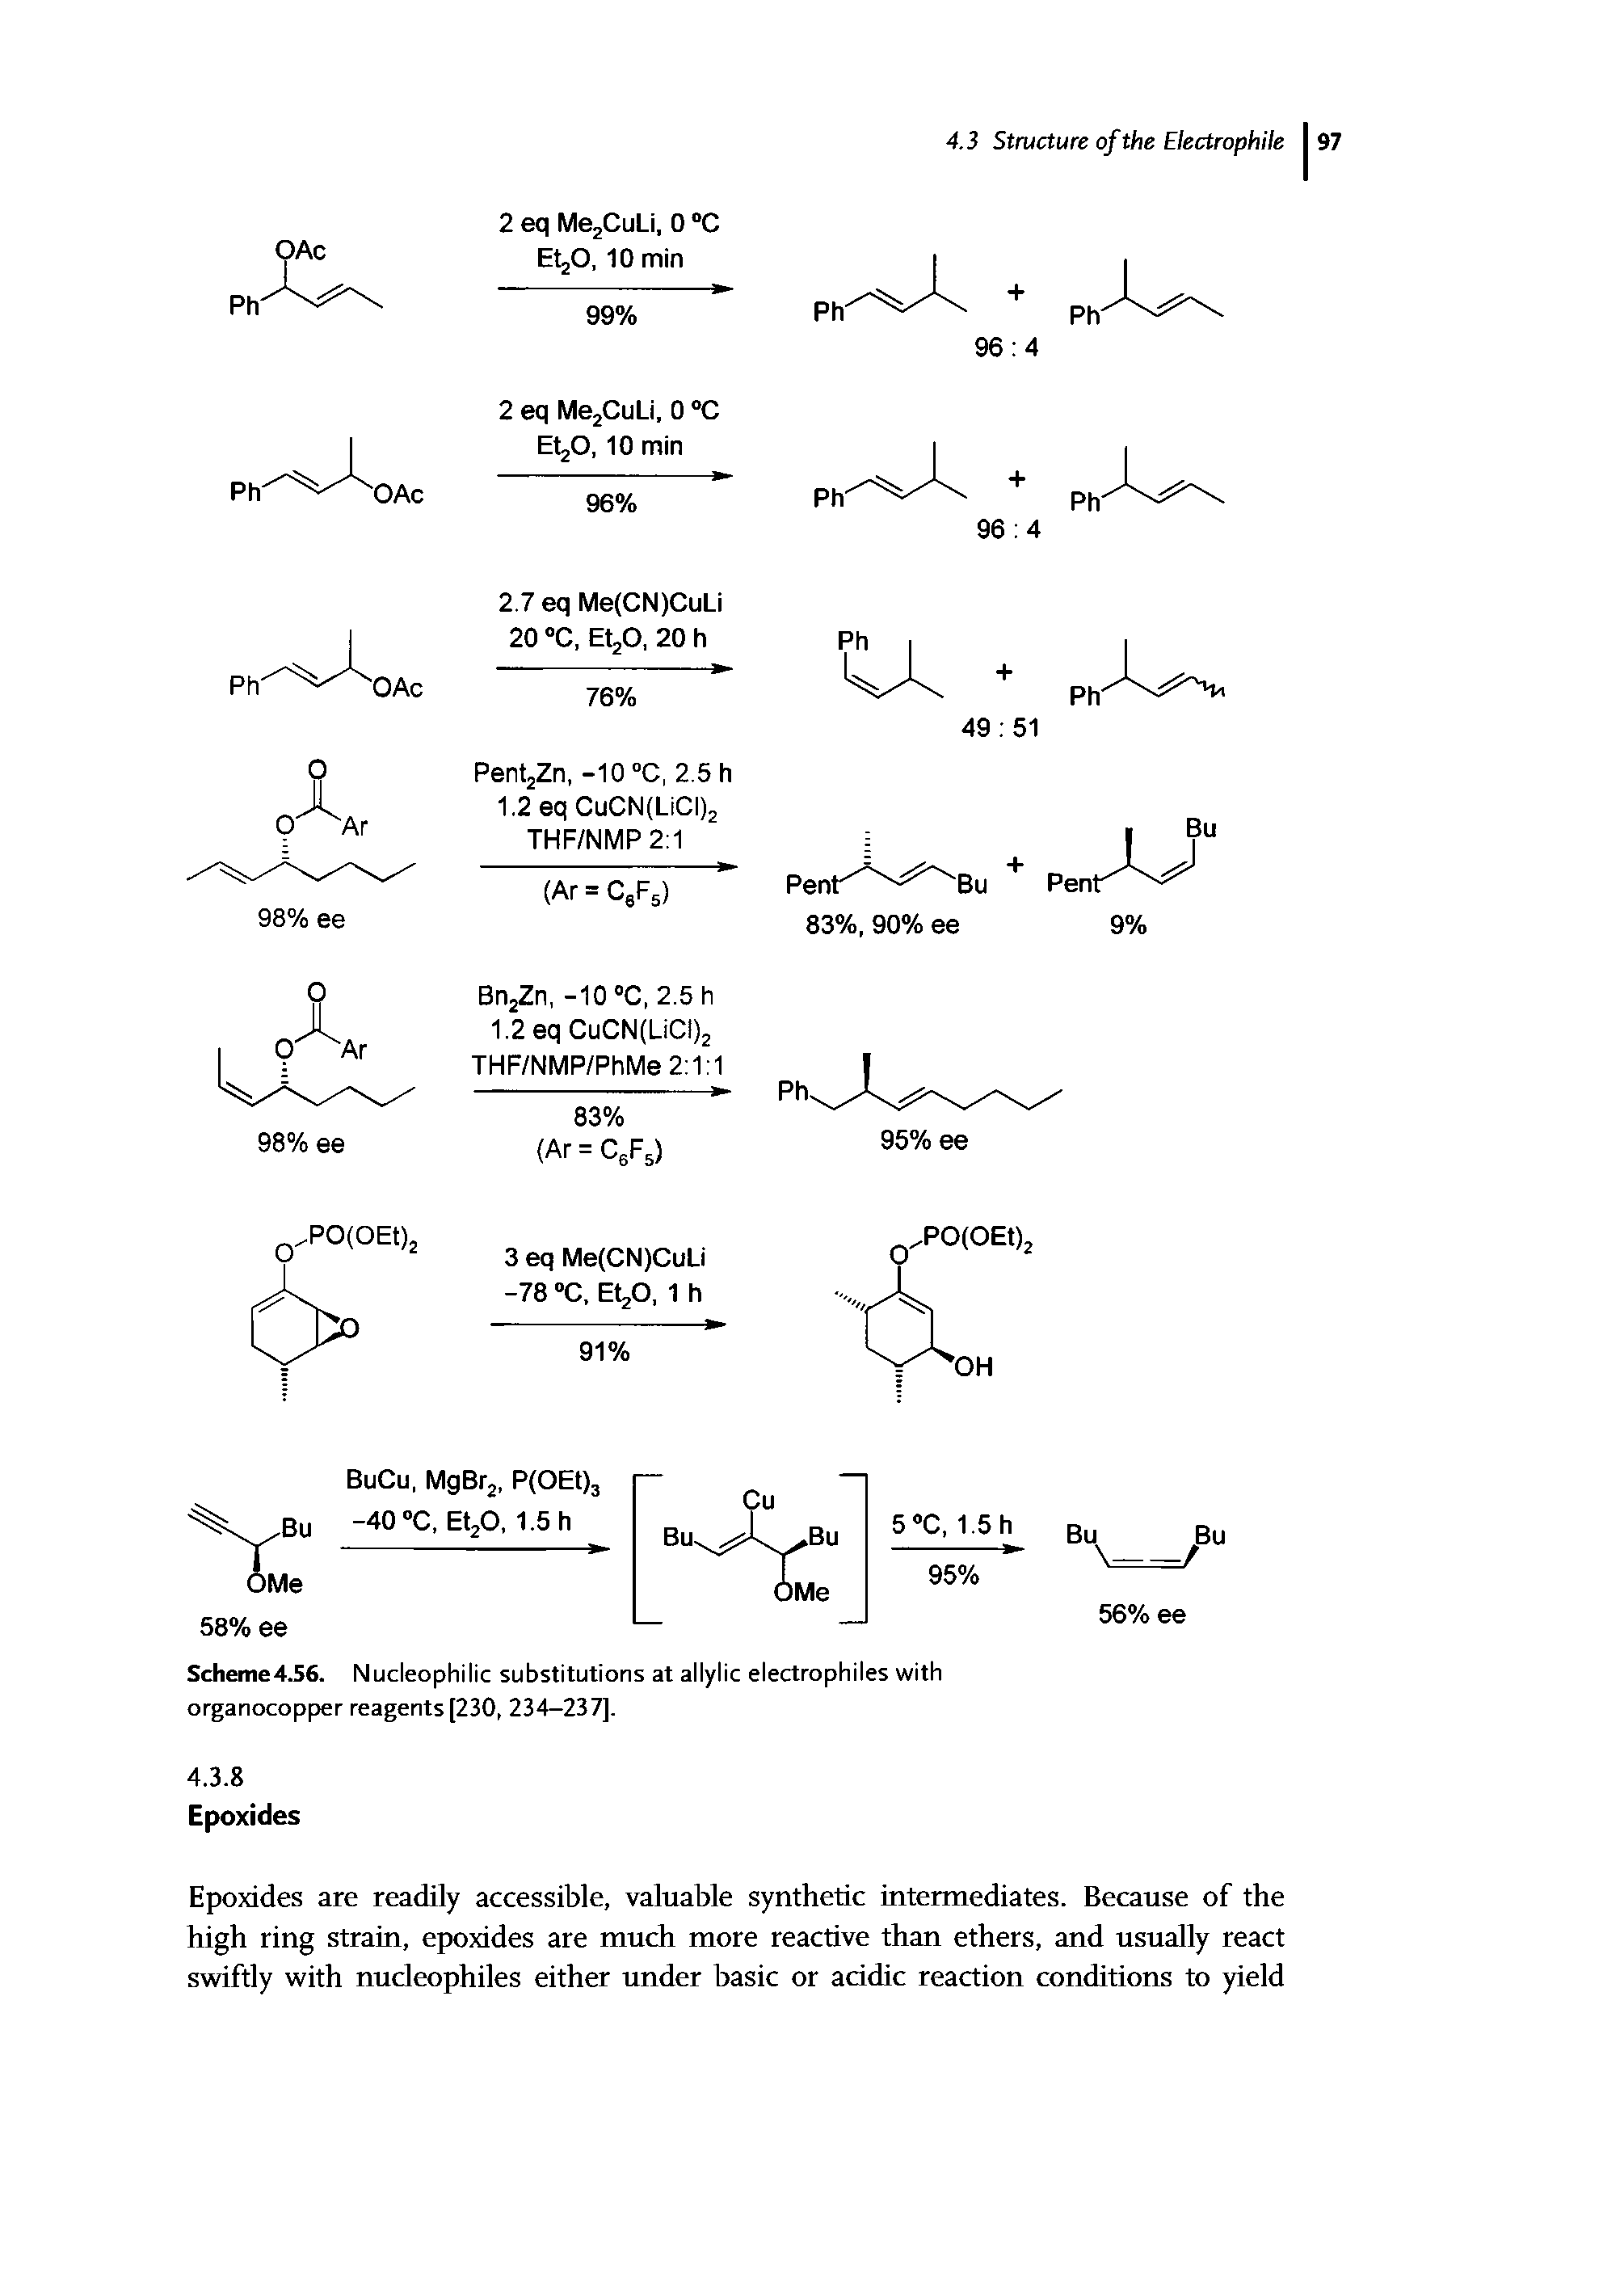 Scheme4.56. Nucleophilic substitutions at allylic electrophiles with organocopper reagents [230, 234—237],...